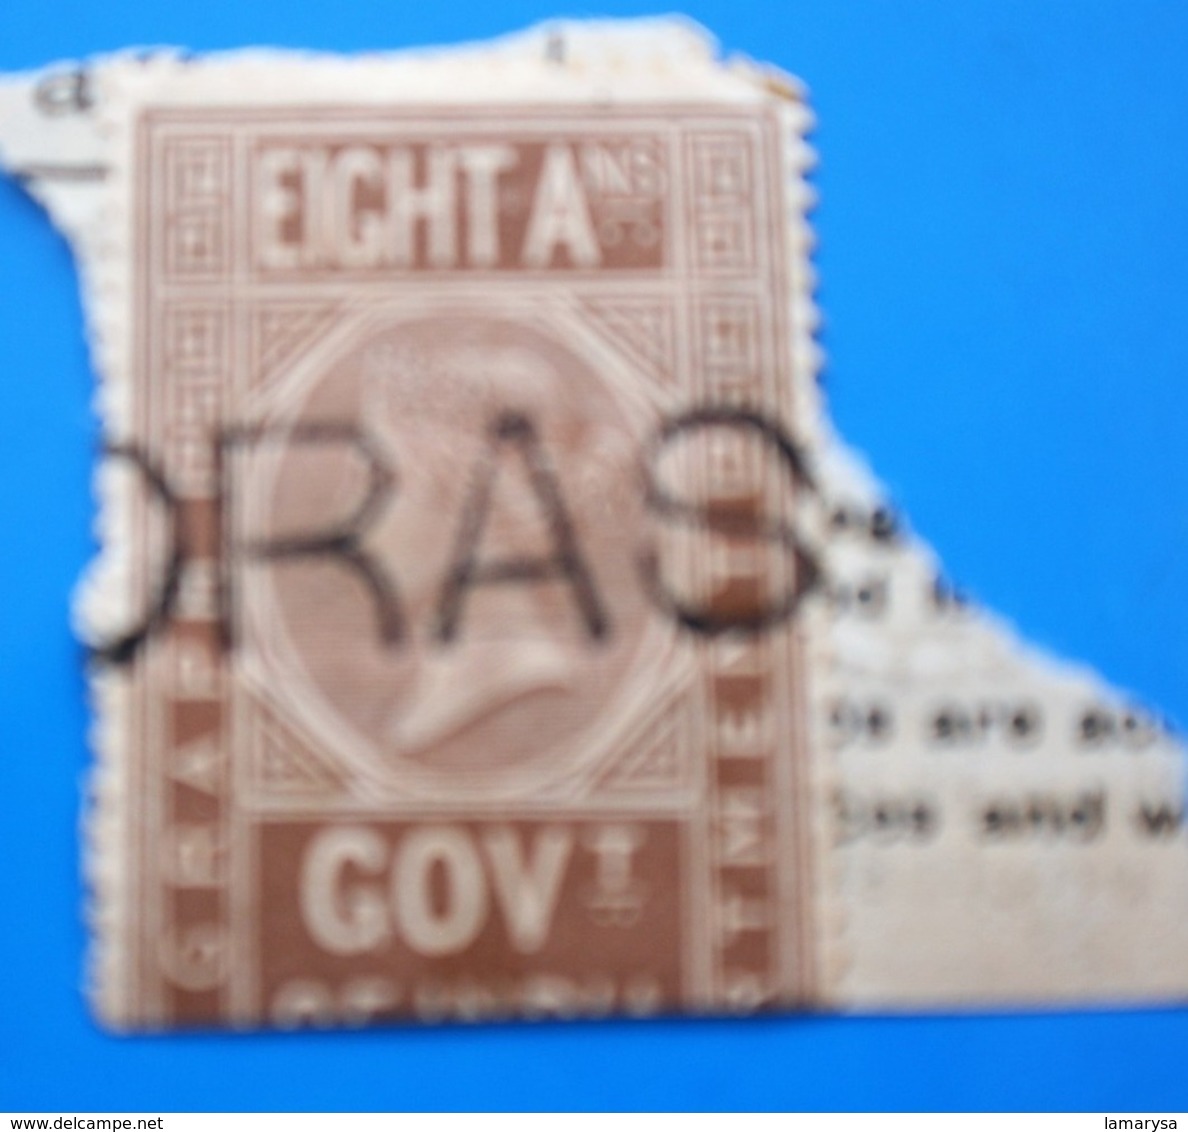 GOVERNEMENT OF INDIA Tax Stamp Service Ex English Colony Cancellation Stamp Of The Consul-Timbre Fiscal Consulat Service - 1854 East India Company Administration